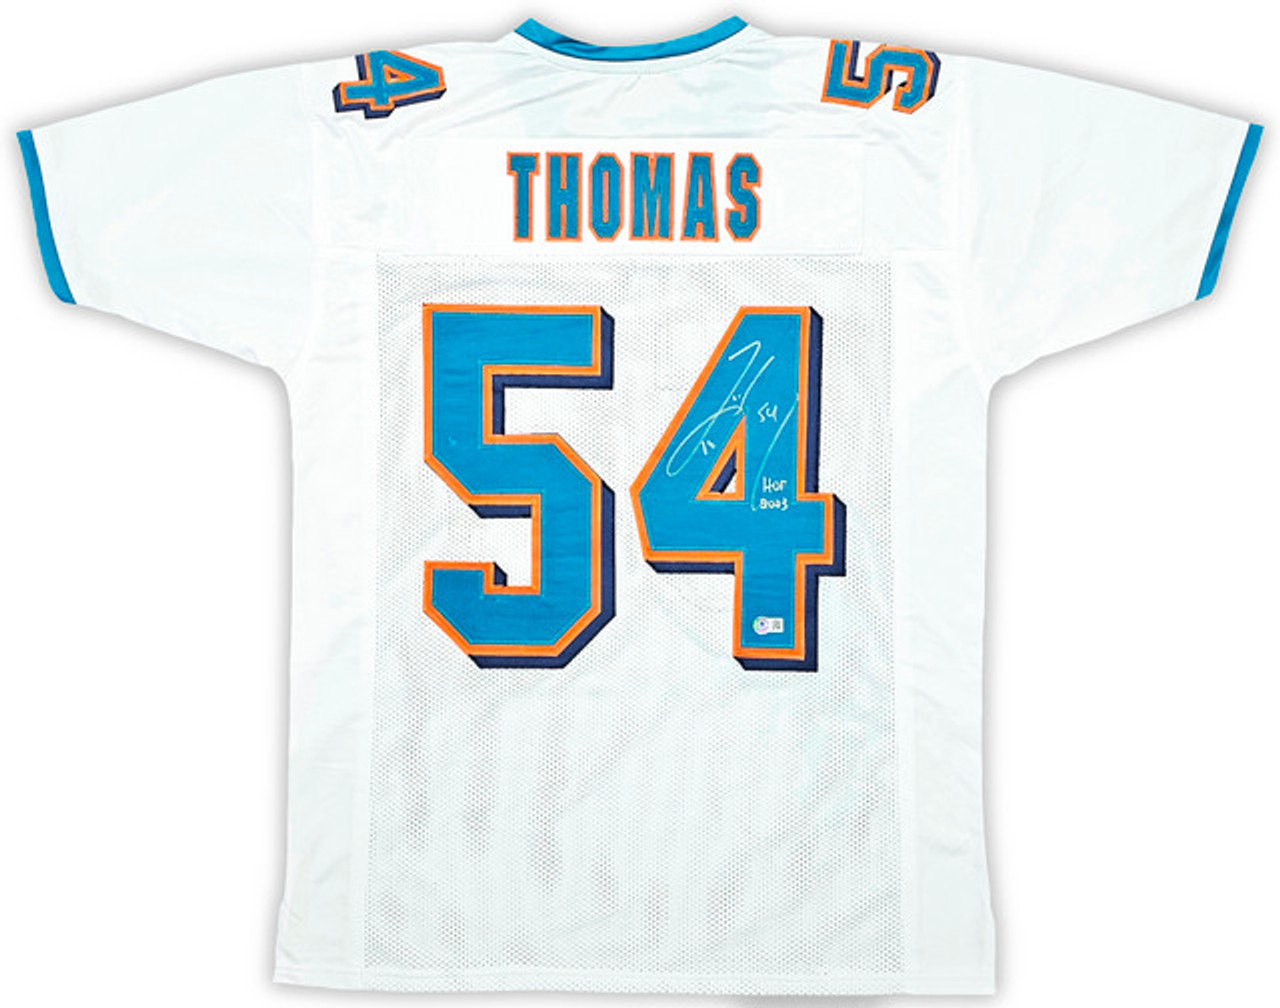 Buy Zac Thomas Miami Dolphins Signed White Jersey Inscribed 'HOF 2023'